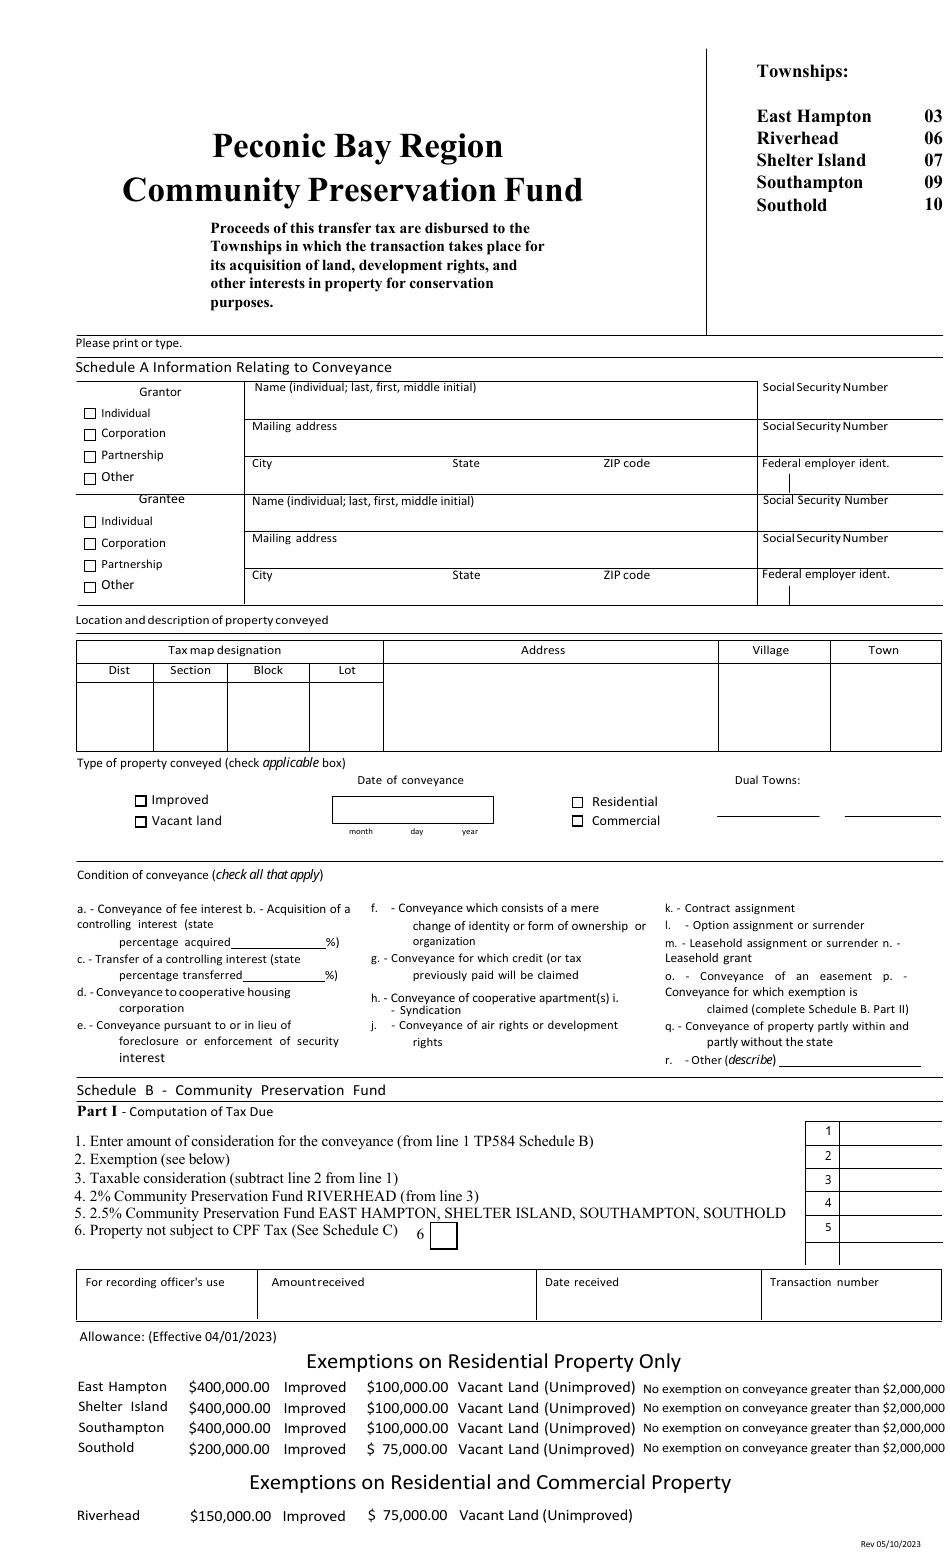 Peconic Bay Region Community Preservation Form - Suffolk County, New York, Page 1